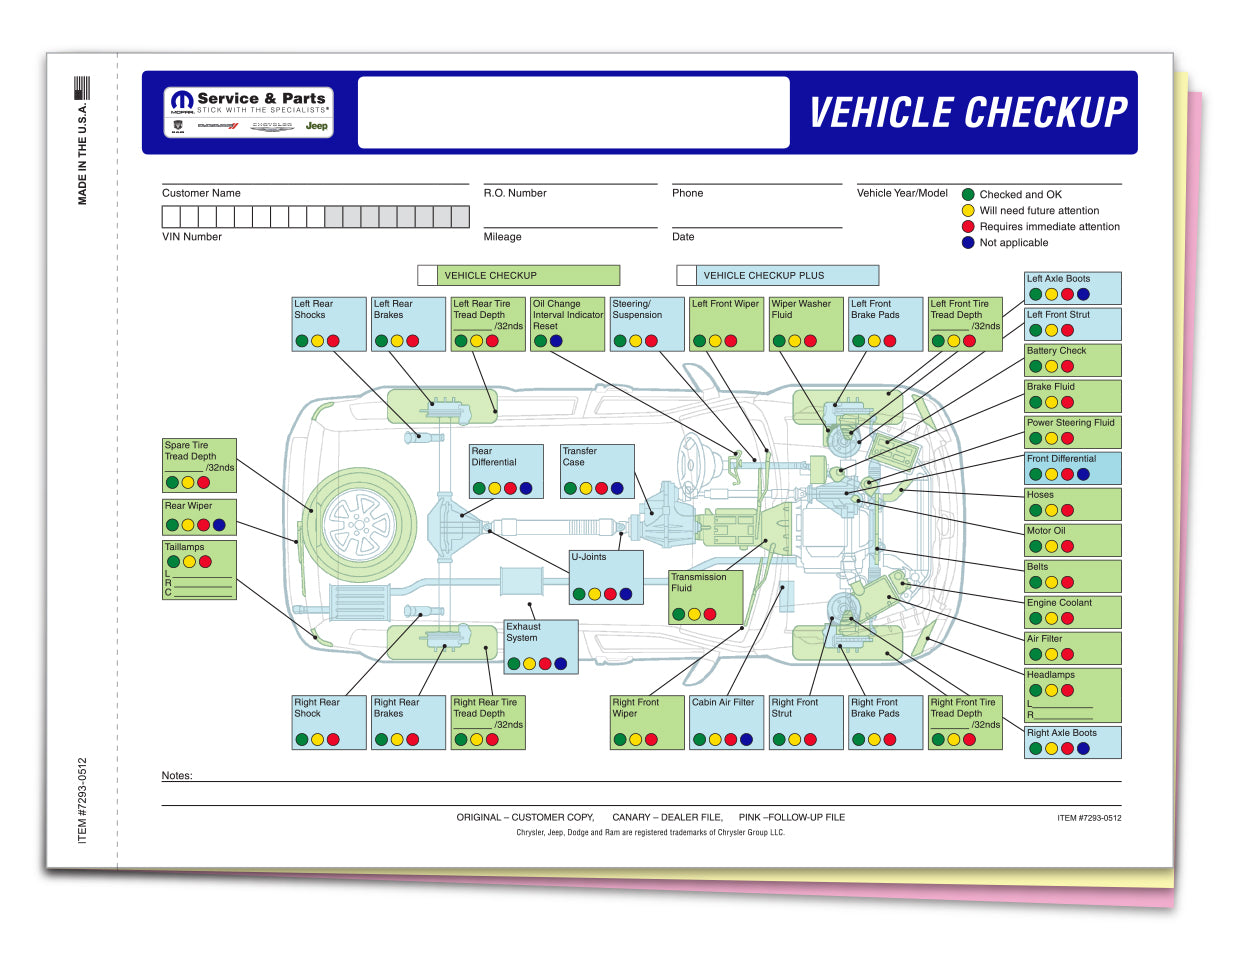 Multi-Point Inspection Forms - Manufacturer Specific - Chrysler www.flywheelnw.com